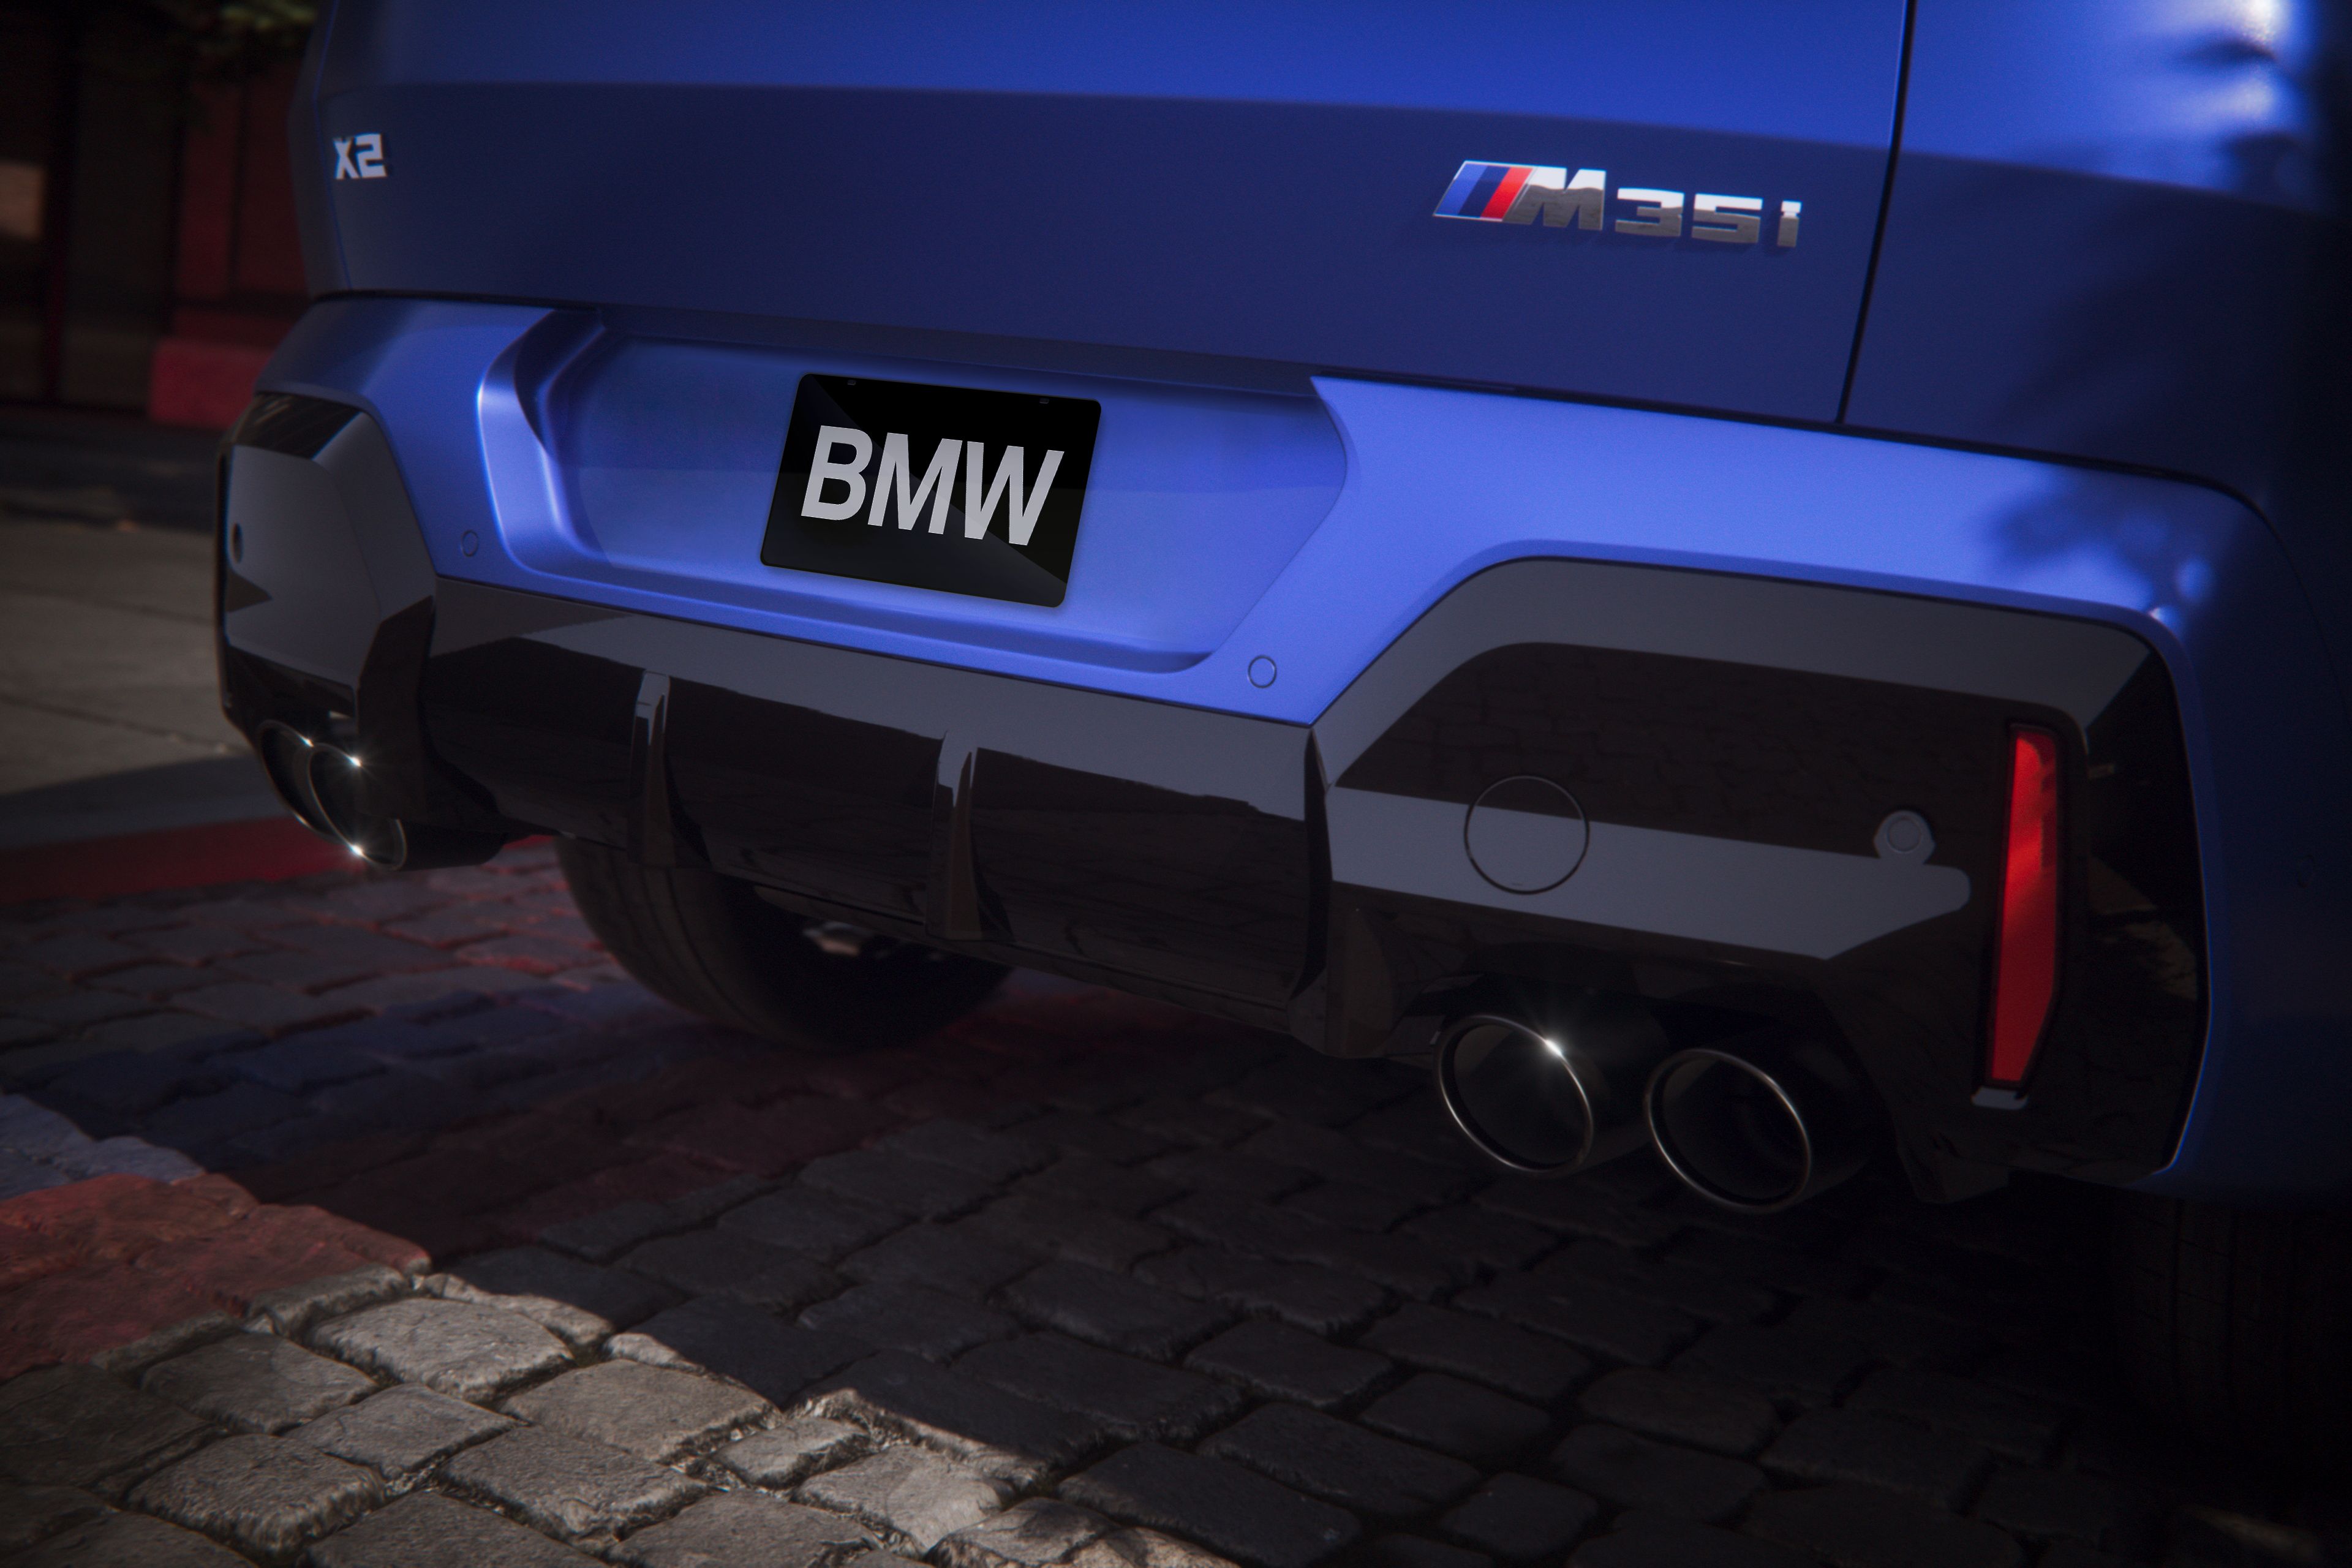 Detail shot of the M35i xDrive’s exhaust system